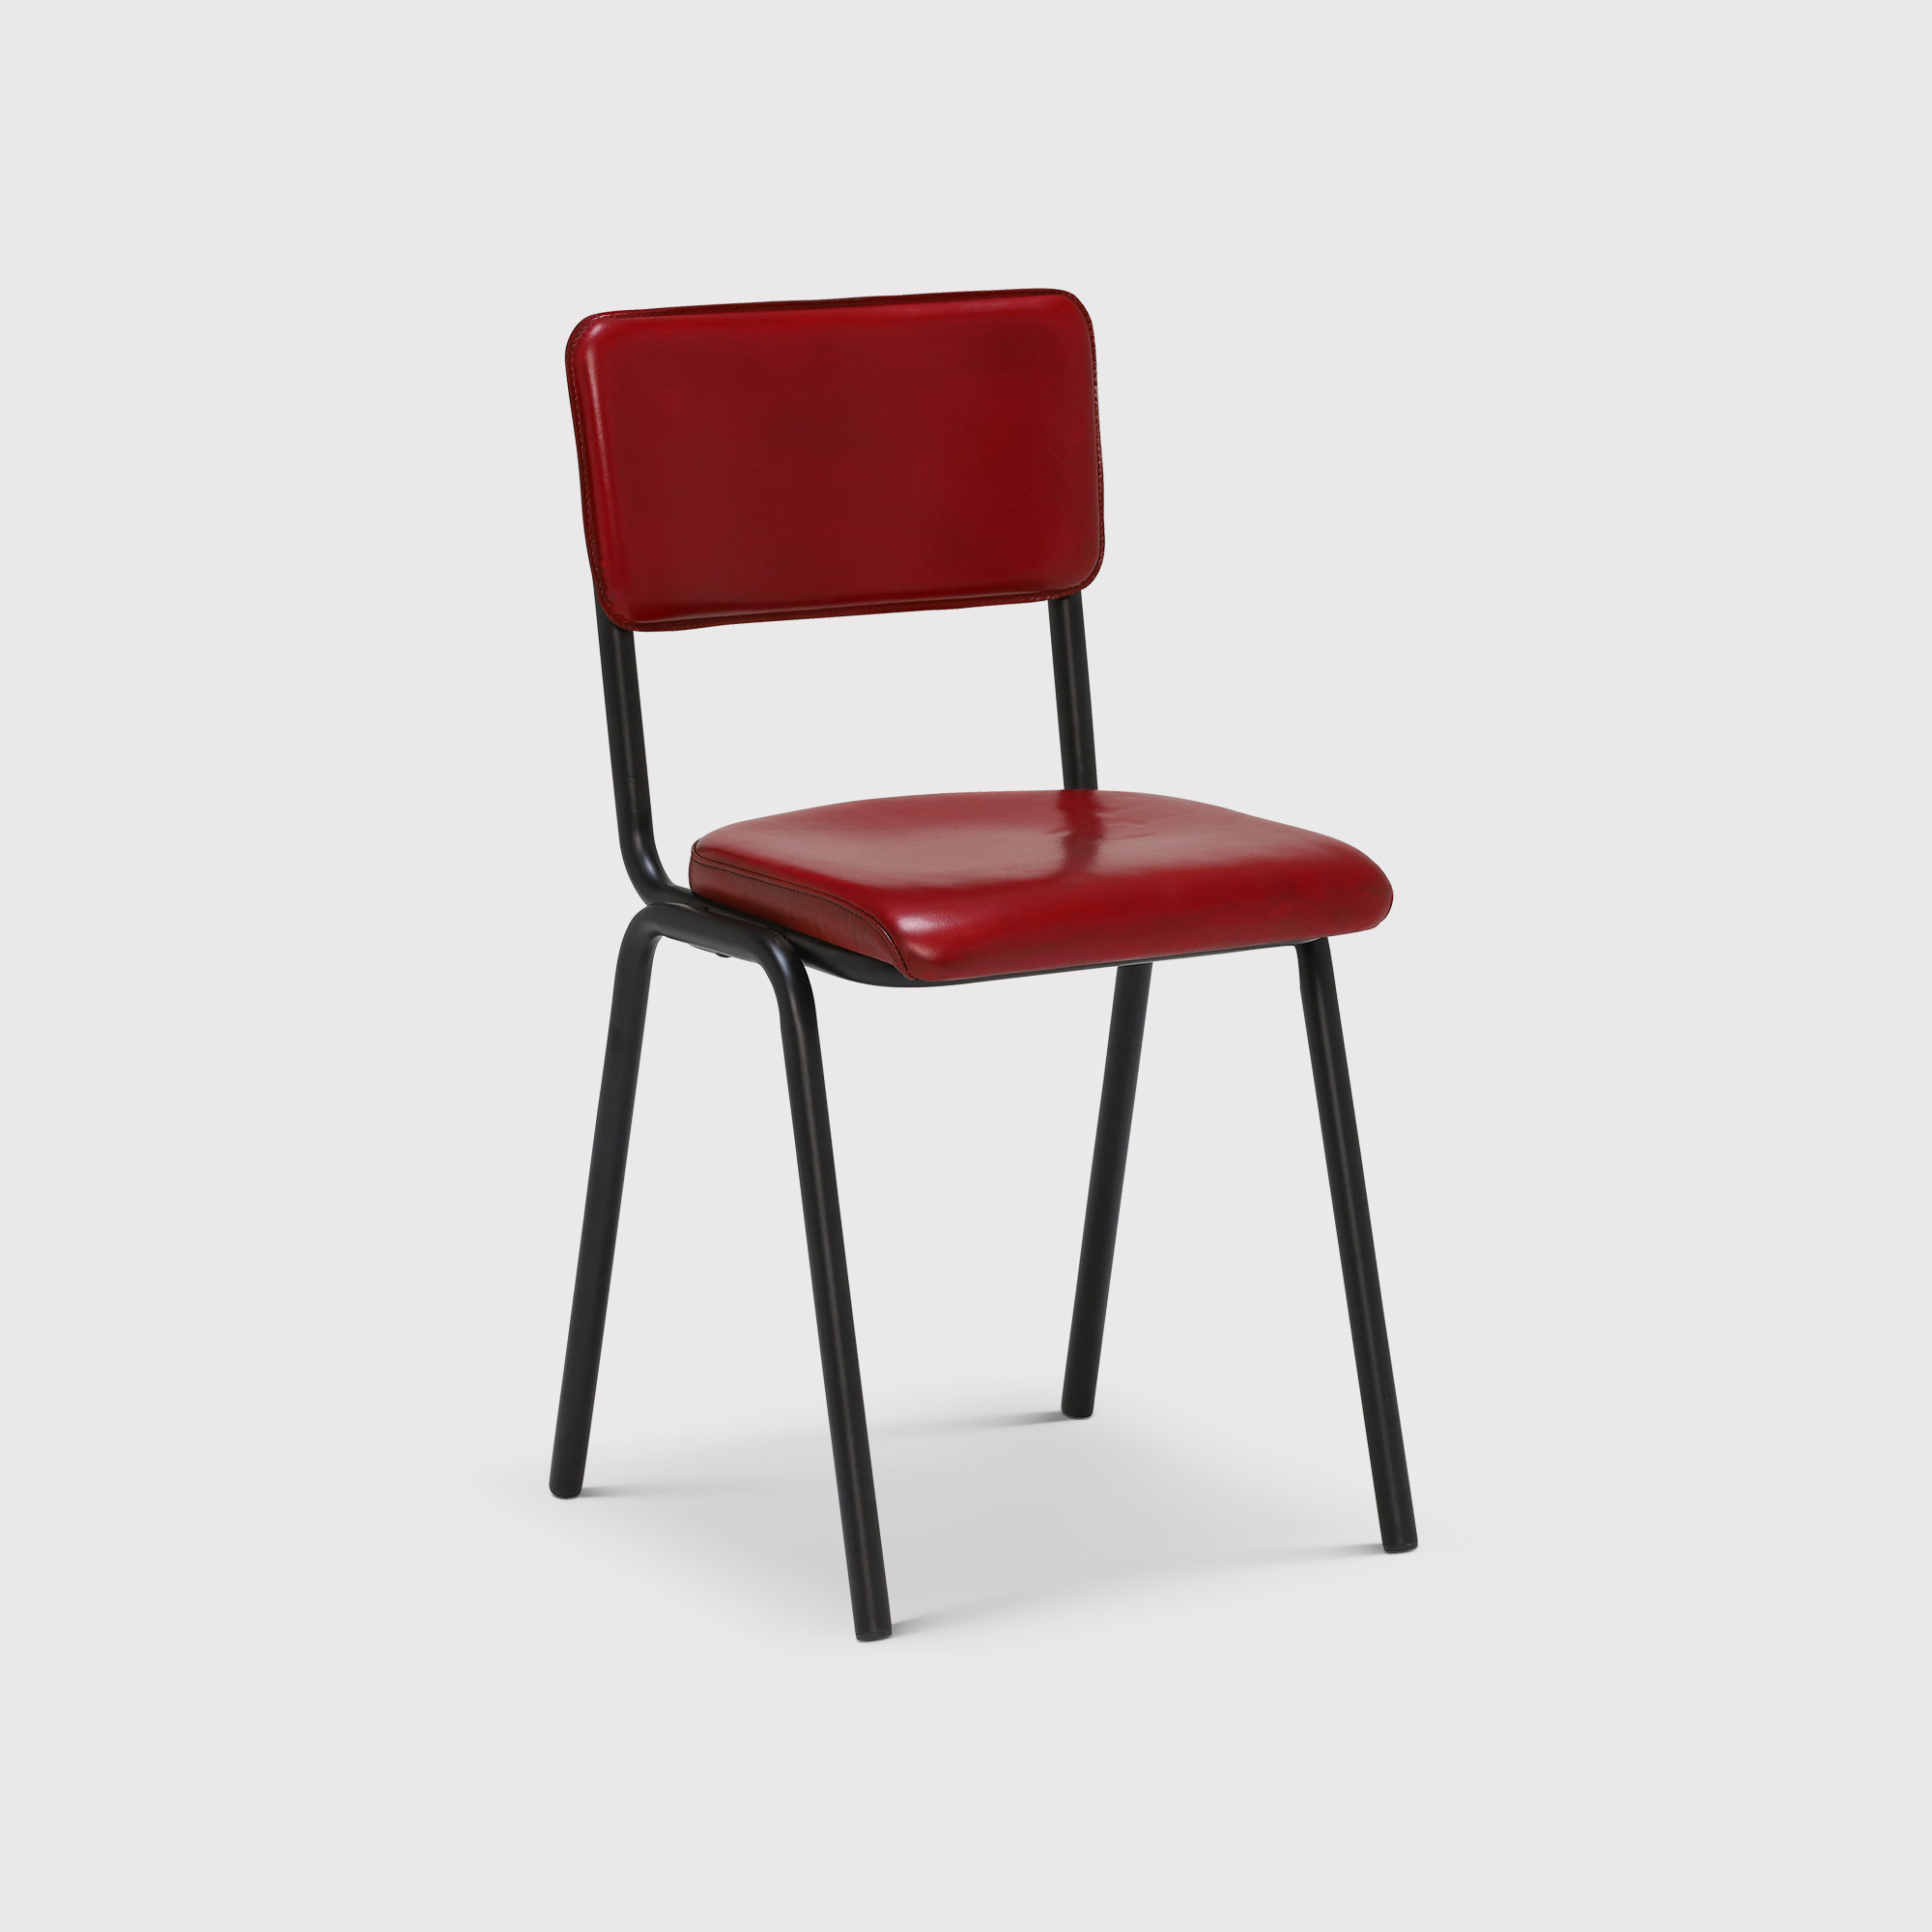 Pure Furniture Twyford Dining Chair, Red Leather - Barker & Stonehouse - image 1